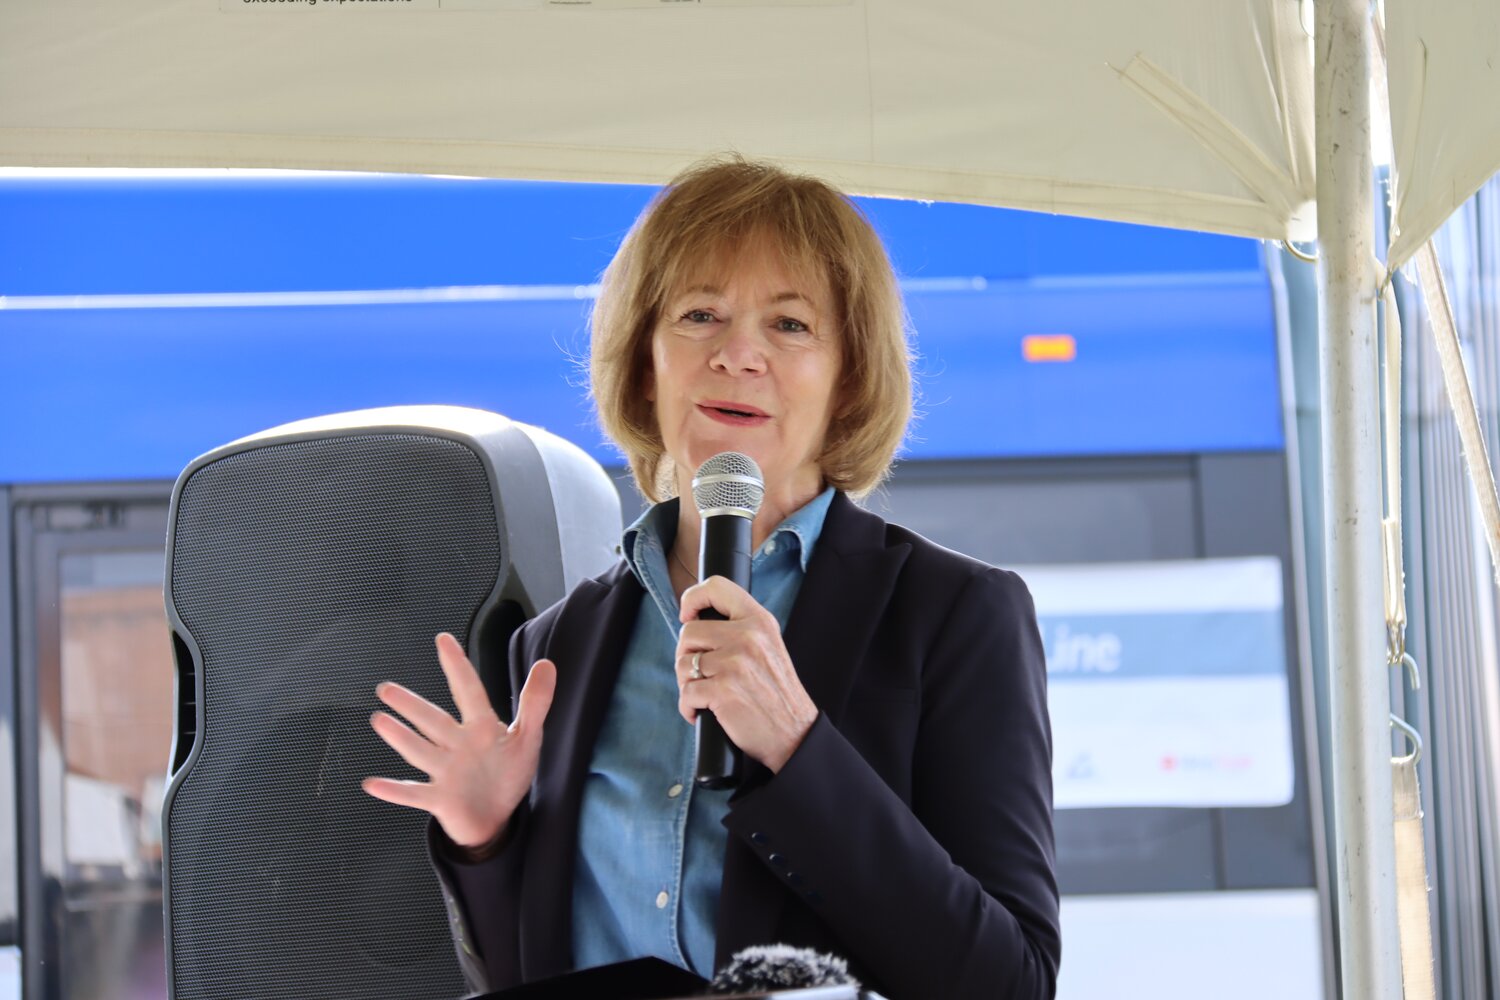 Minneapolis resident and U.S. Senator Tina Smith, said, “This project is about connecting people to their lives.”